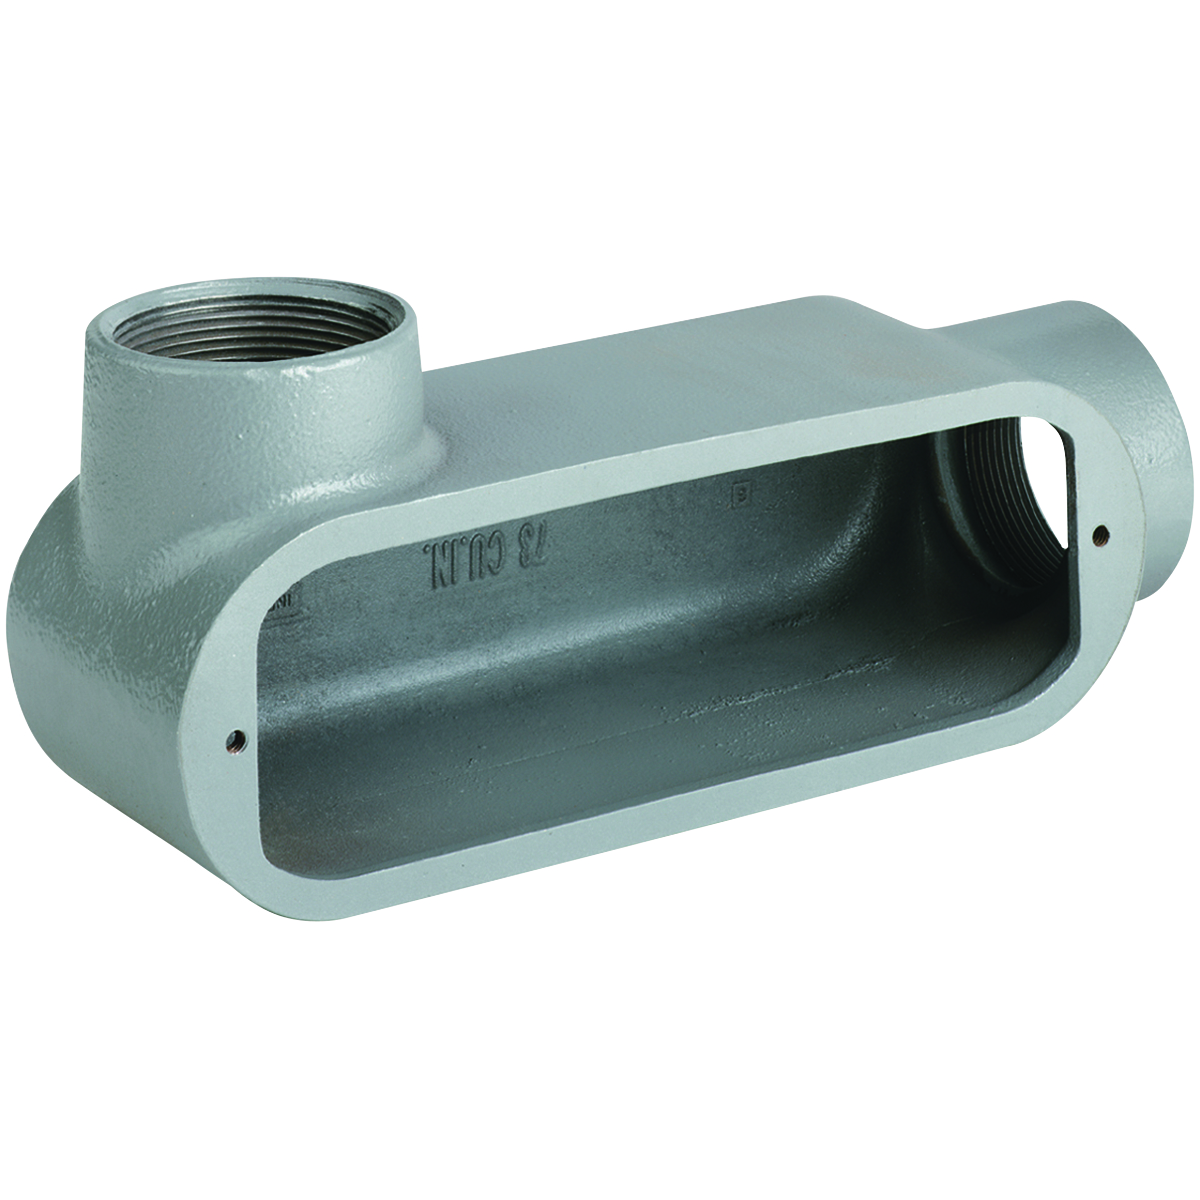 O SERIES/DURALOY 5 SERIES - MALLEABLE IRON CONDUIT BODY - LL TYPE - HUBSIZE 3 INCH - VOLUME 173.0 CUBIC INCHES